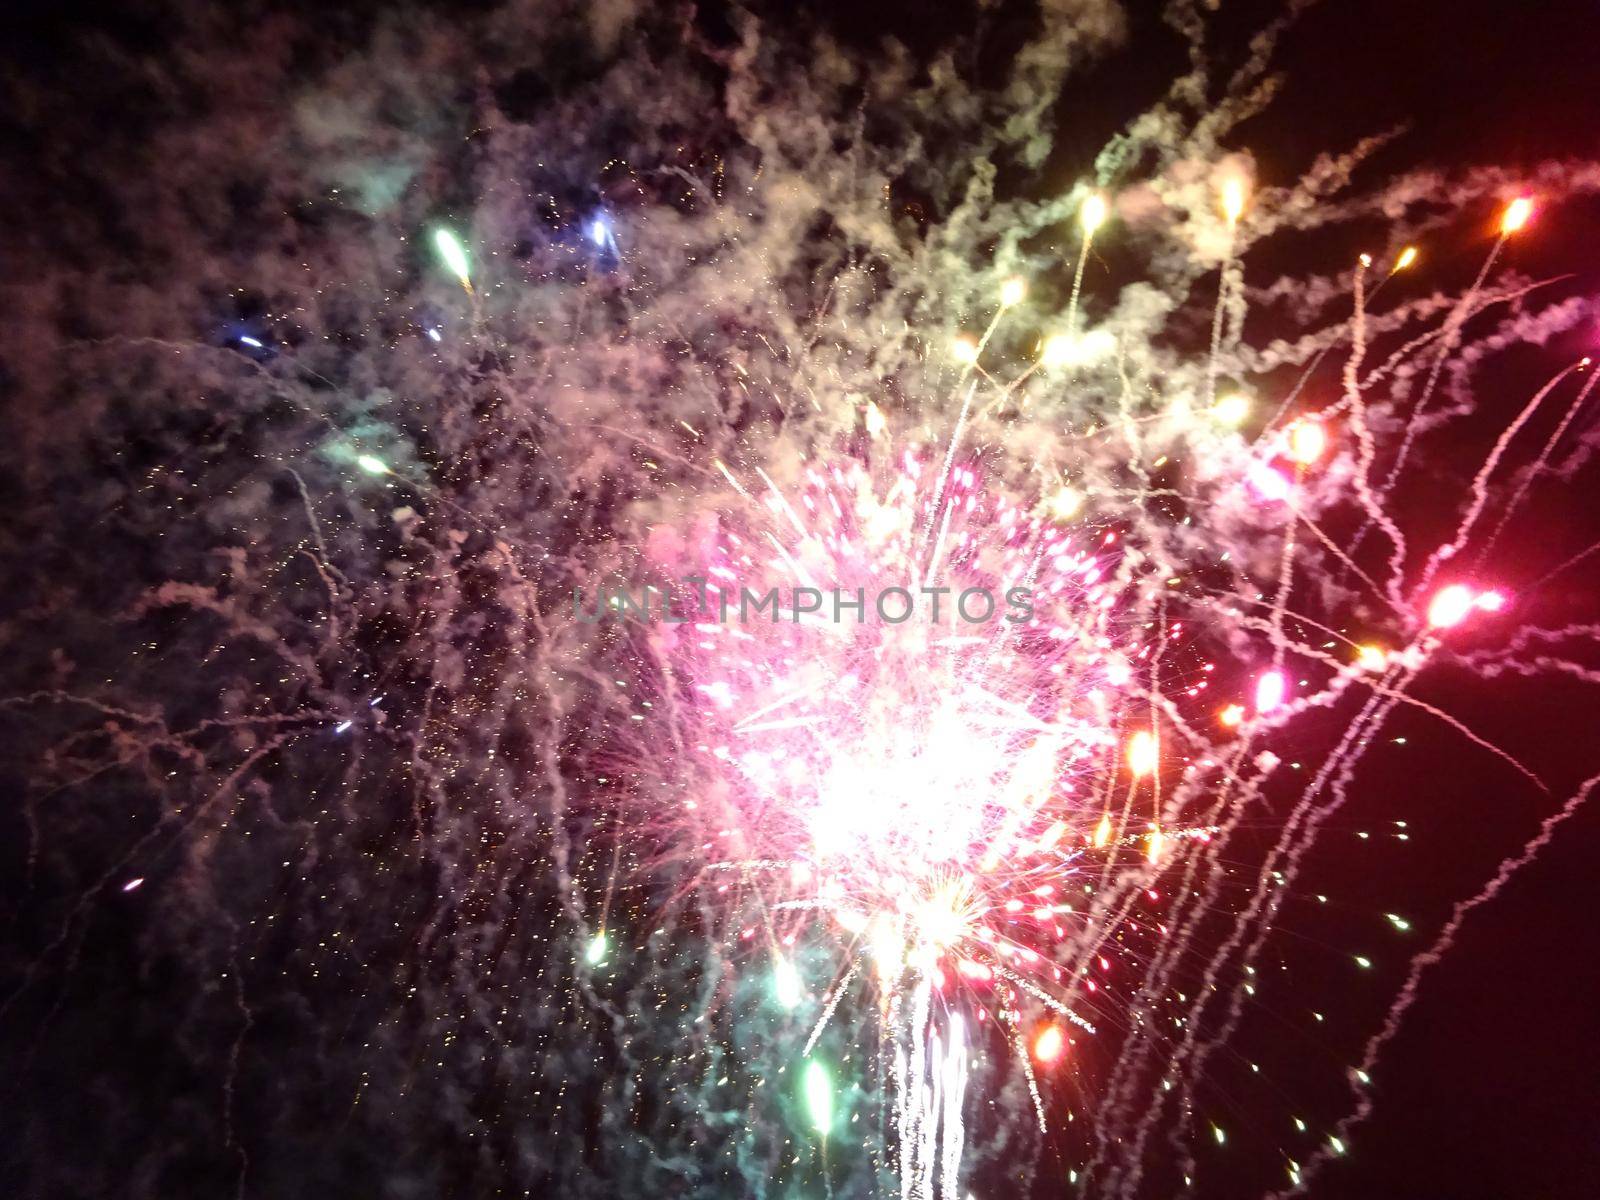 New Years Fireworks burst in the air at Outdoor New Years Party December 31, 2014 in Honolulu, Hawaii.